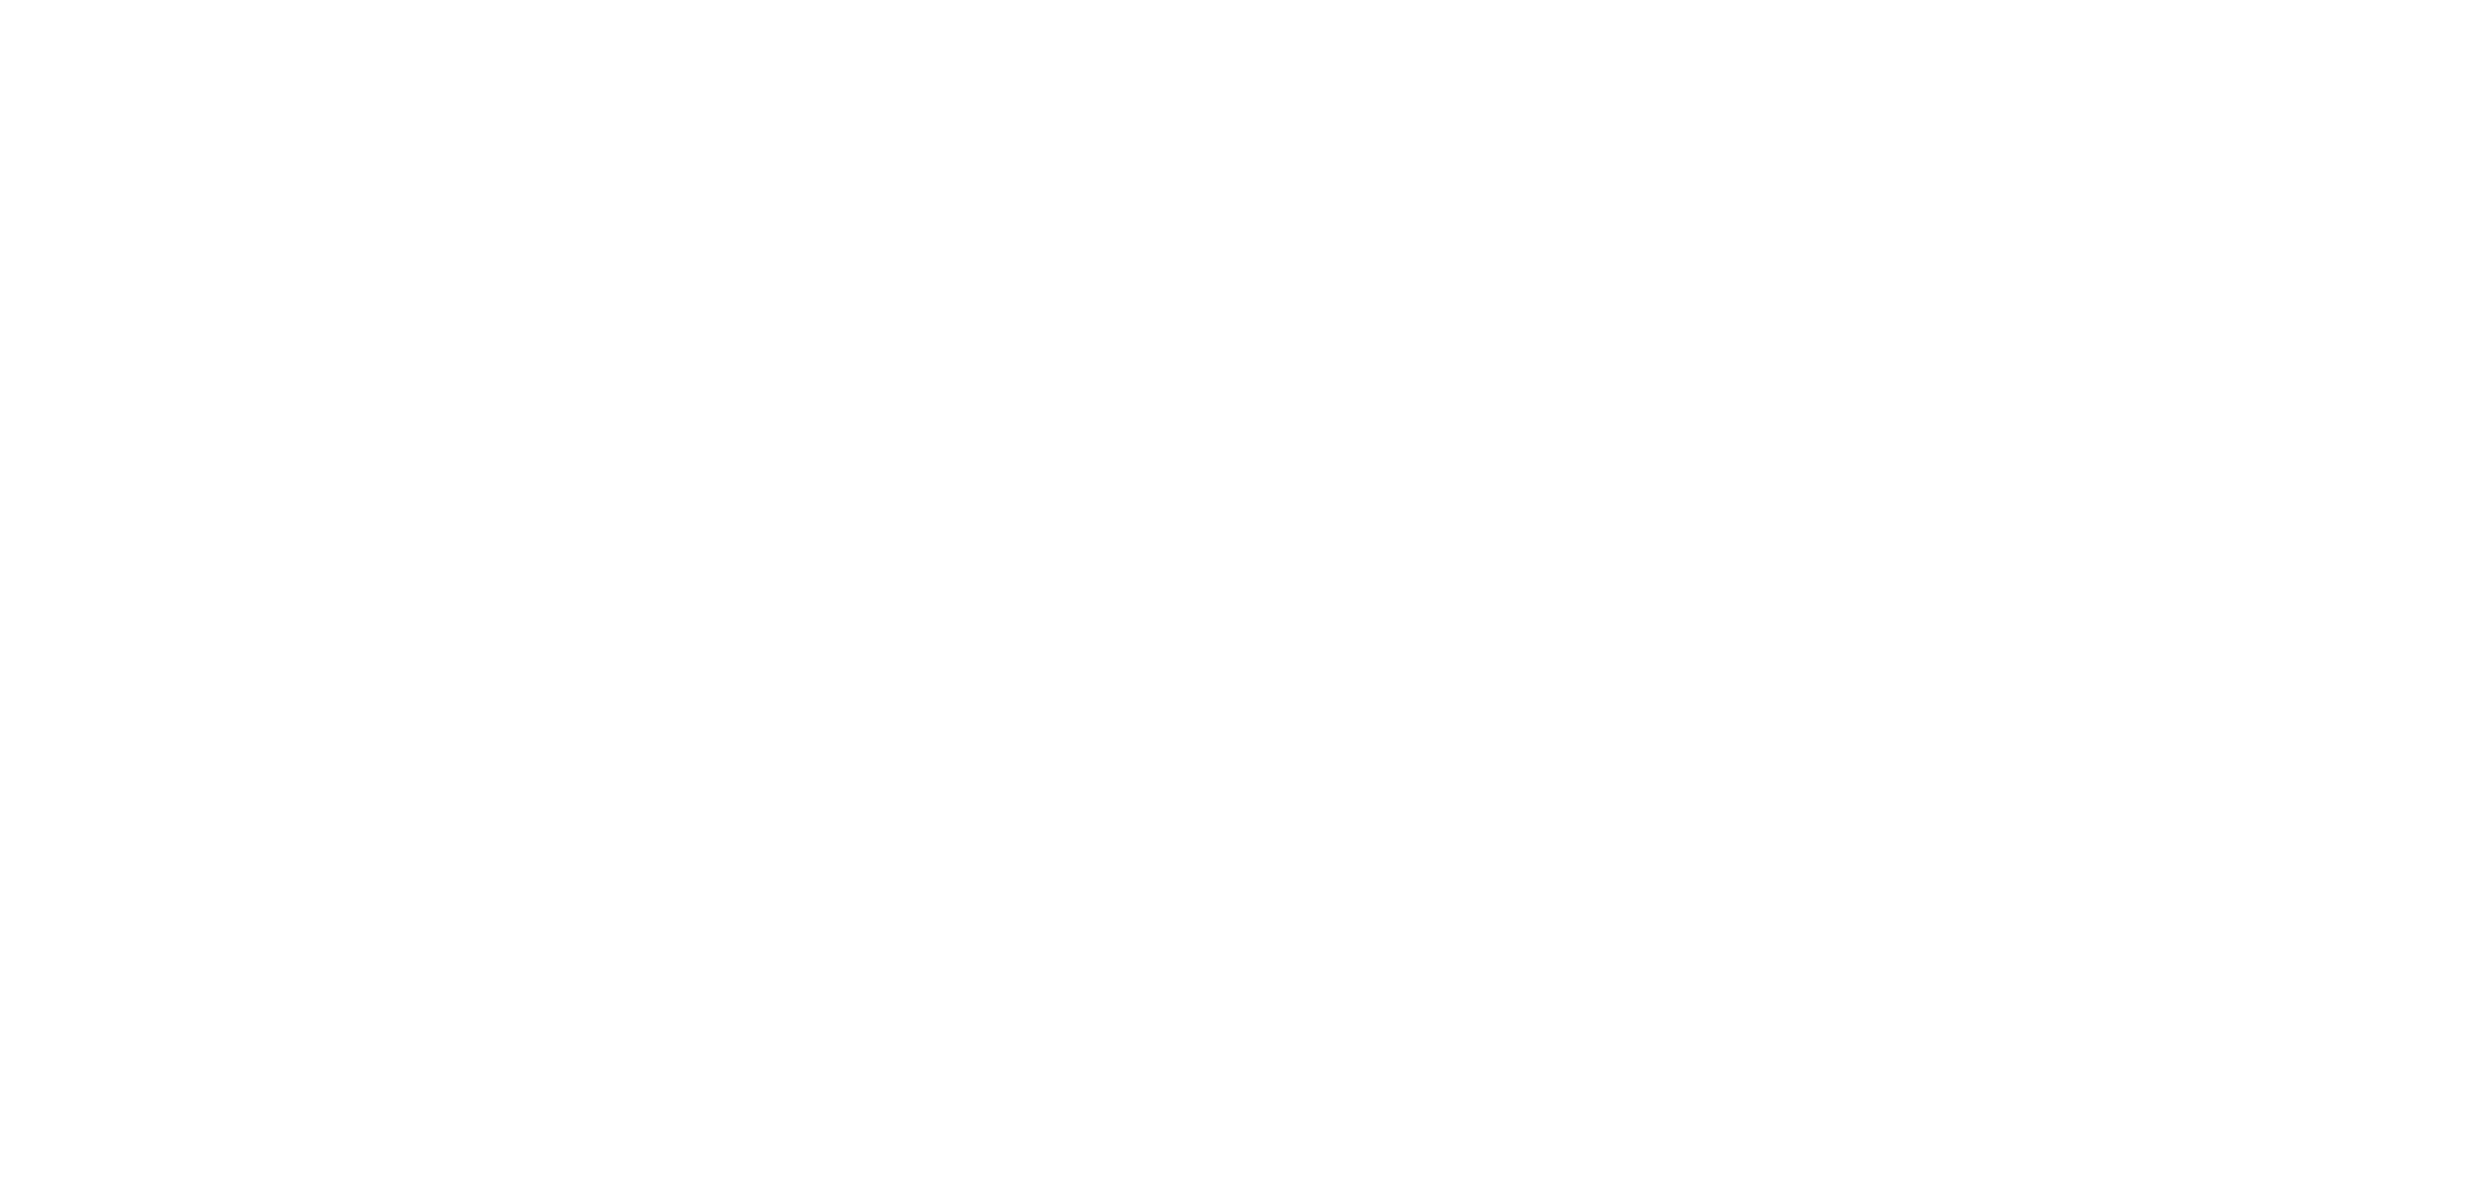 HGTV is an American pay television channel owned by Warner Bros. Discovery. The network primarily broadcasts reality programming related to home improvement and real estate. As of February 2015, approximately 95,628,000 American households receive HGTV.